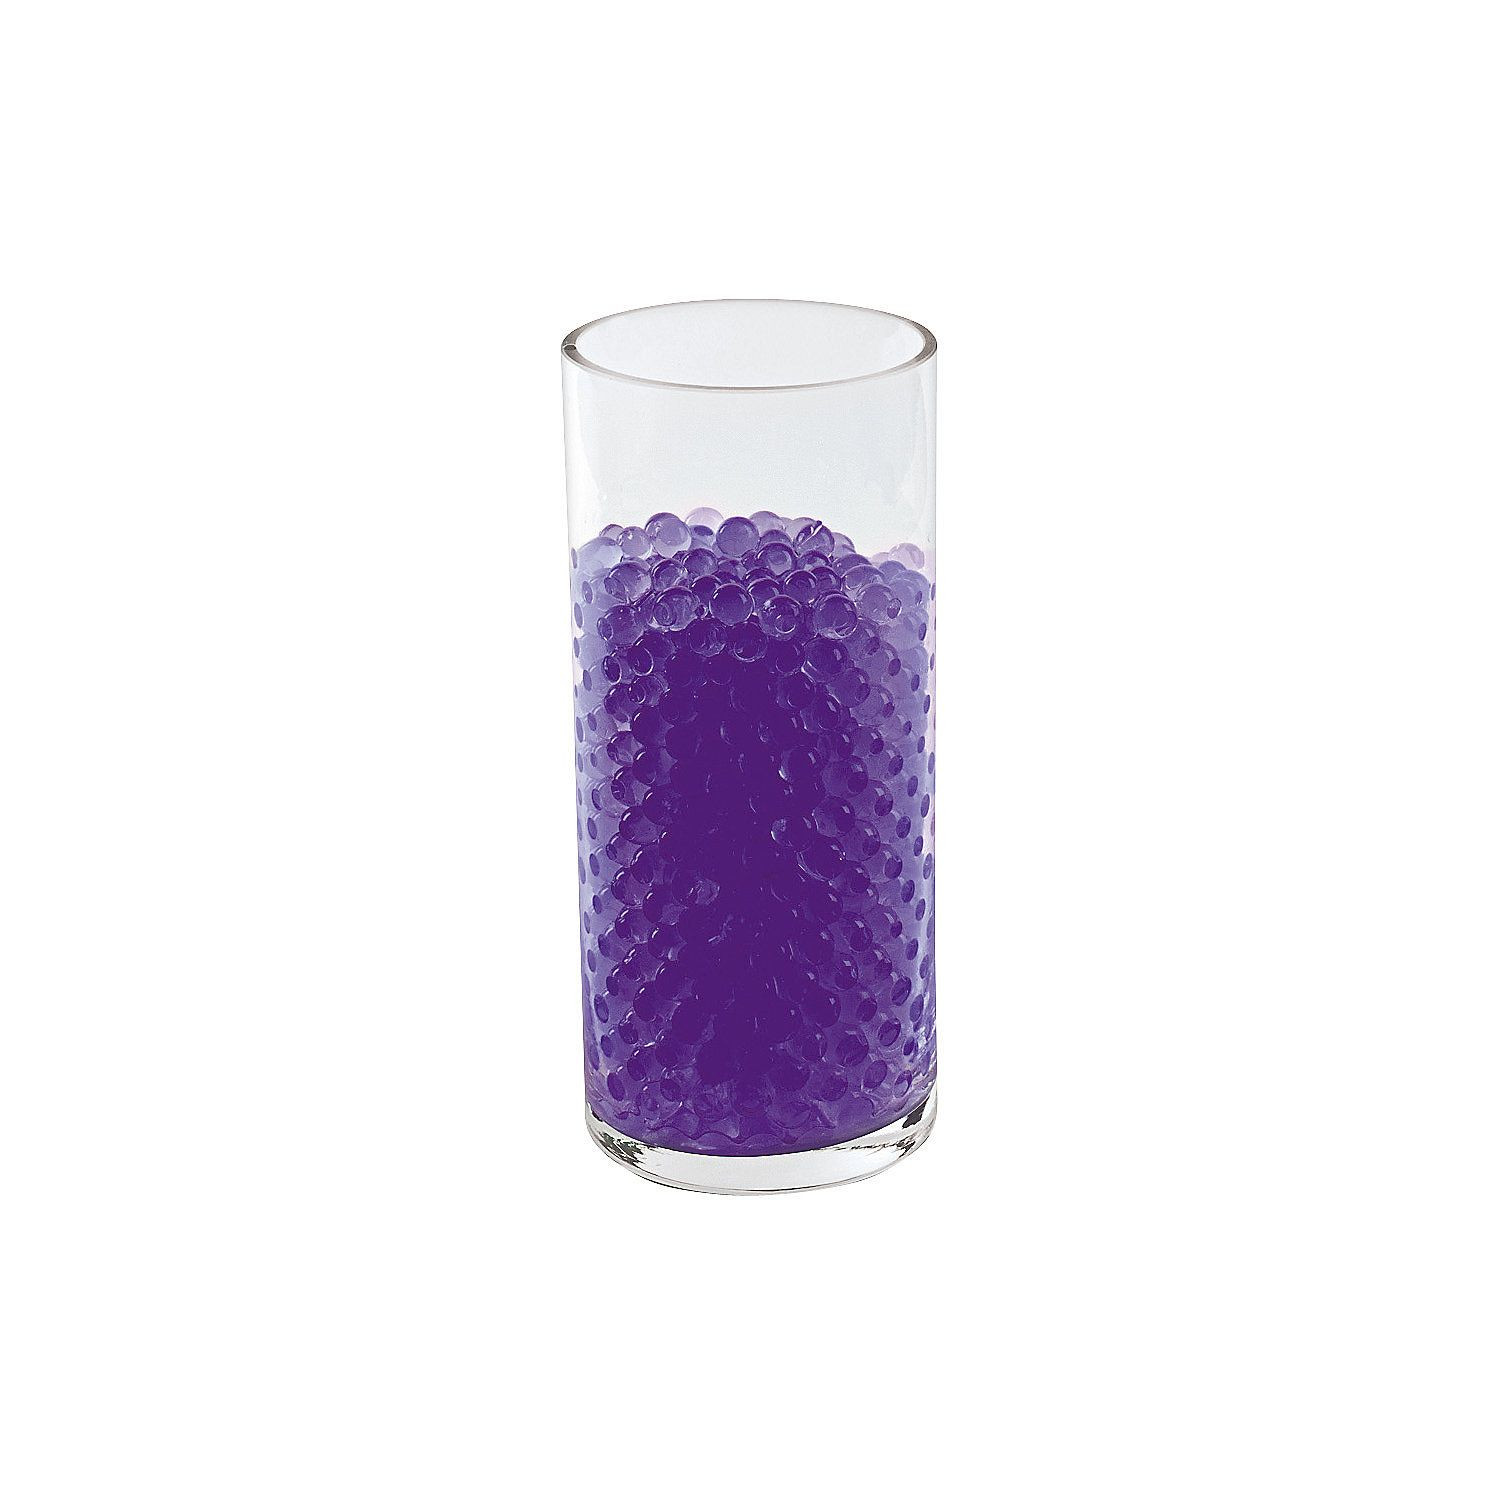 11 Spectacular Aqua Gel Beads Vase Filler 2024 free download aqua gel beads vase filler of purple pearl water beads orientaltrading com to go under the pertaining to 856e8ff19cd220476818ad51758bfe61